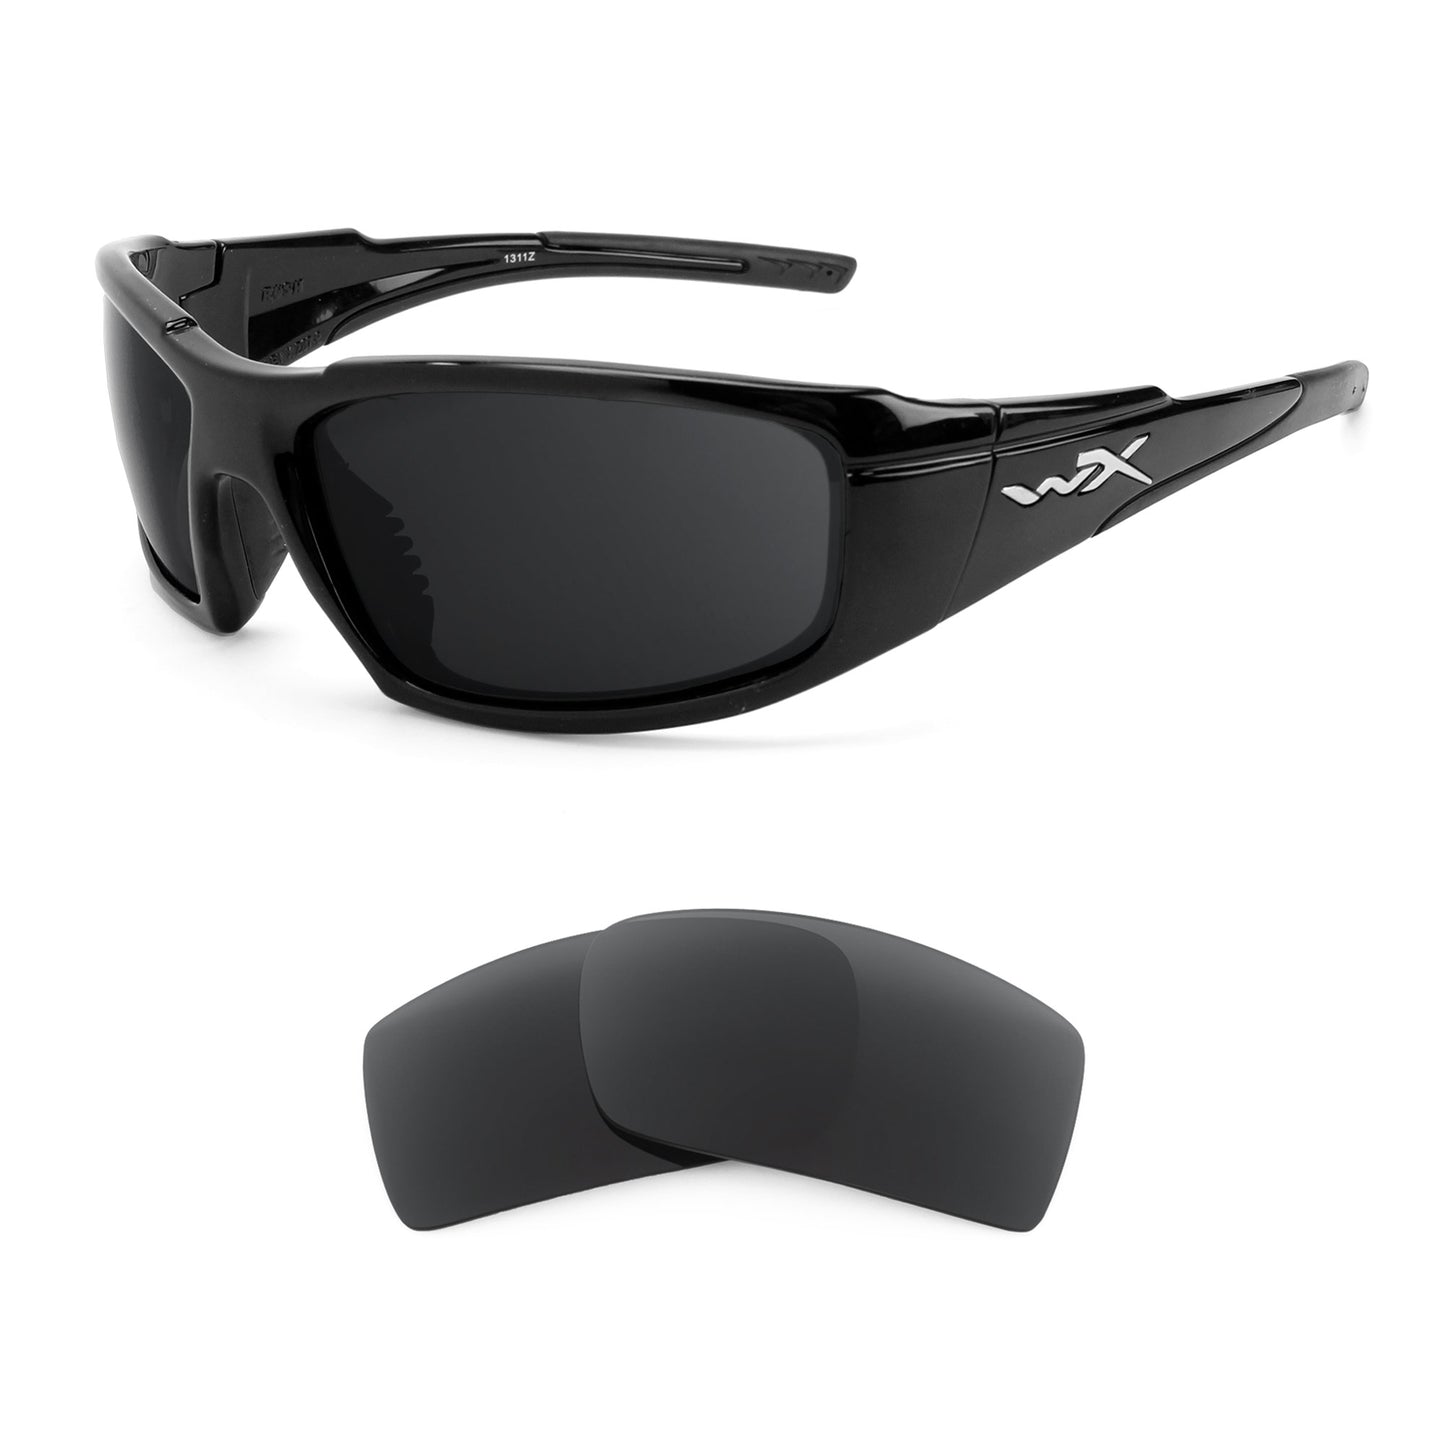 Wiley X Rush sunglasses with replacement lenses